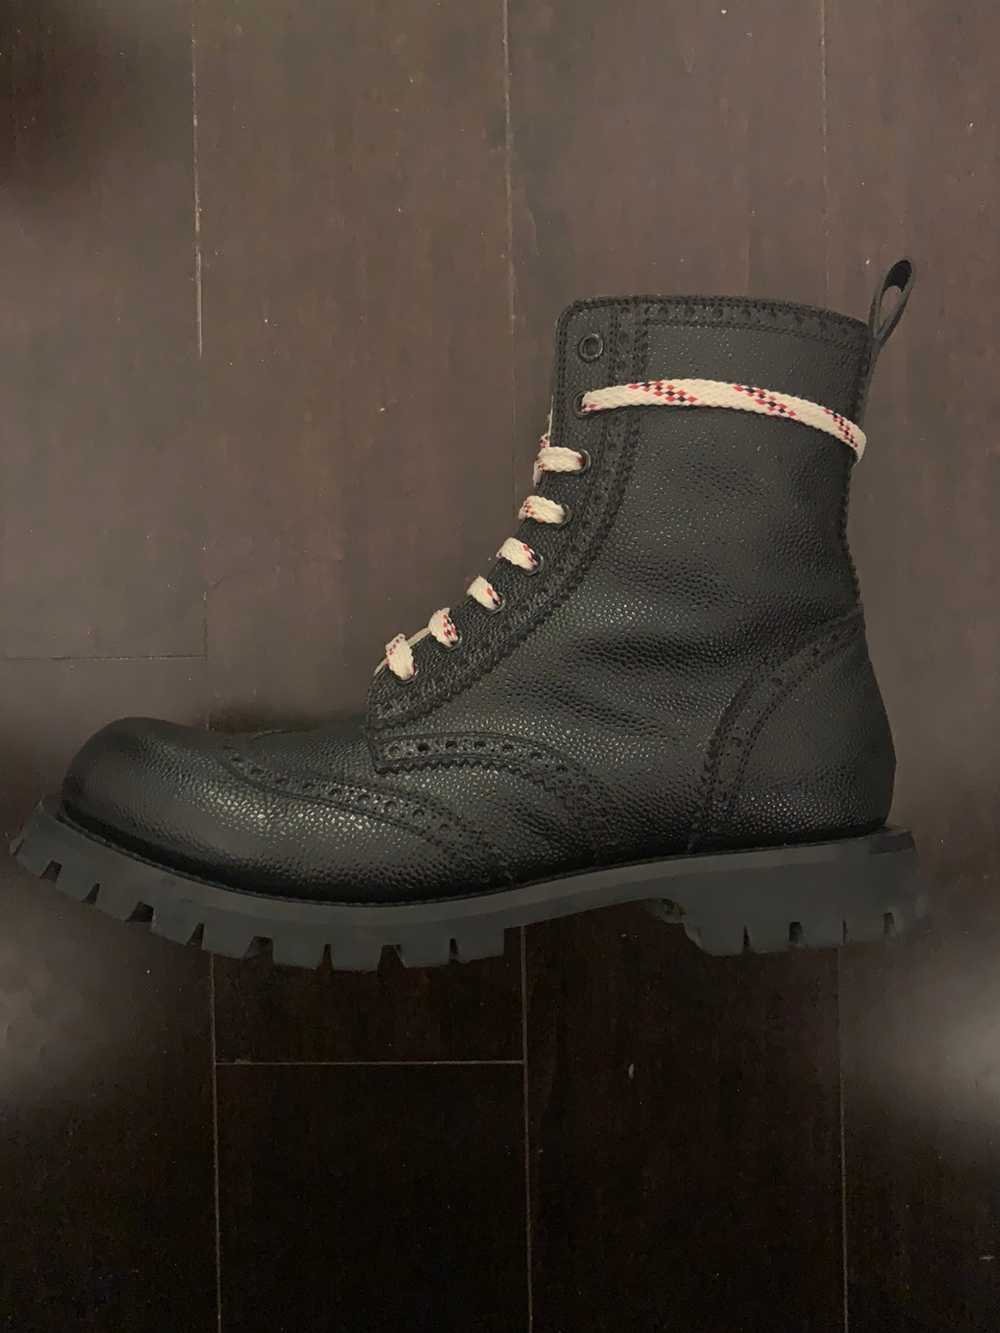 Gucci Gucci leather brogue lace-up boot - image 1